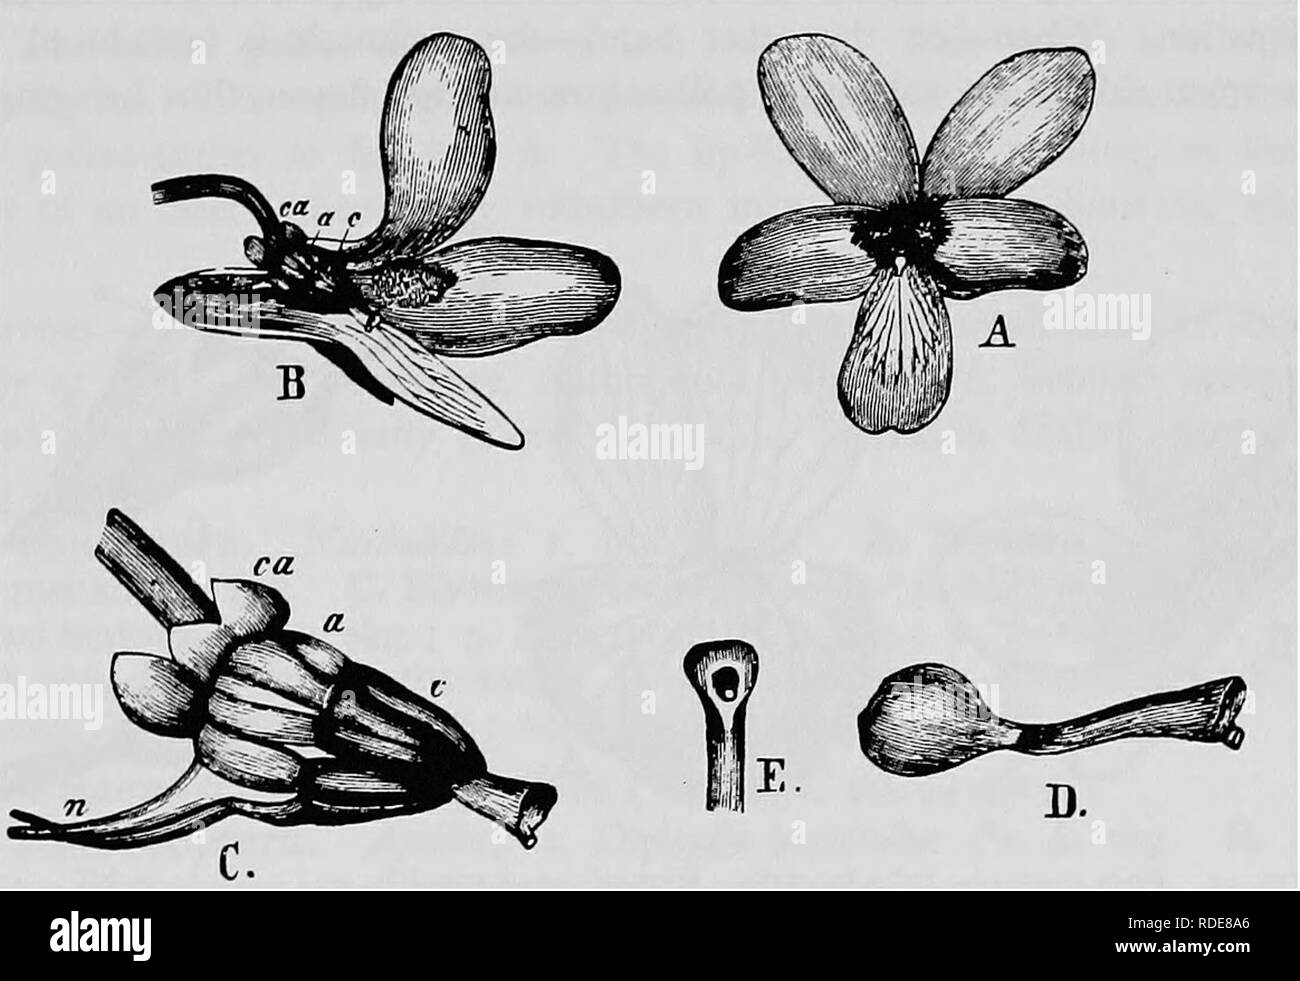 . Handbook of flower pollination : based upon Hermann Mu?ller's work 'The fertilisation of flowers by insects' . Fertilization of plants. VIOLARIEAE 141 Visitors.—Hart observed an owlet-moth—CucuUia umbratica L.—a butterfly— Hipparchia janira L.—and humble-bees. Wittrock noticed Bombus subterraneus L. and several butterflies near Stockholm. 362. V. pinnata L. (Herm. MuUer, ' Alpenblumen,' p. 151.)—The lower lip possesses no hairs for the reception of the pollen which falls from the cone of anthers. The proboscis of an insect when thrust into the spur is, therefore, not covered with pollen from Stock Photo